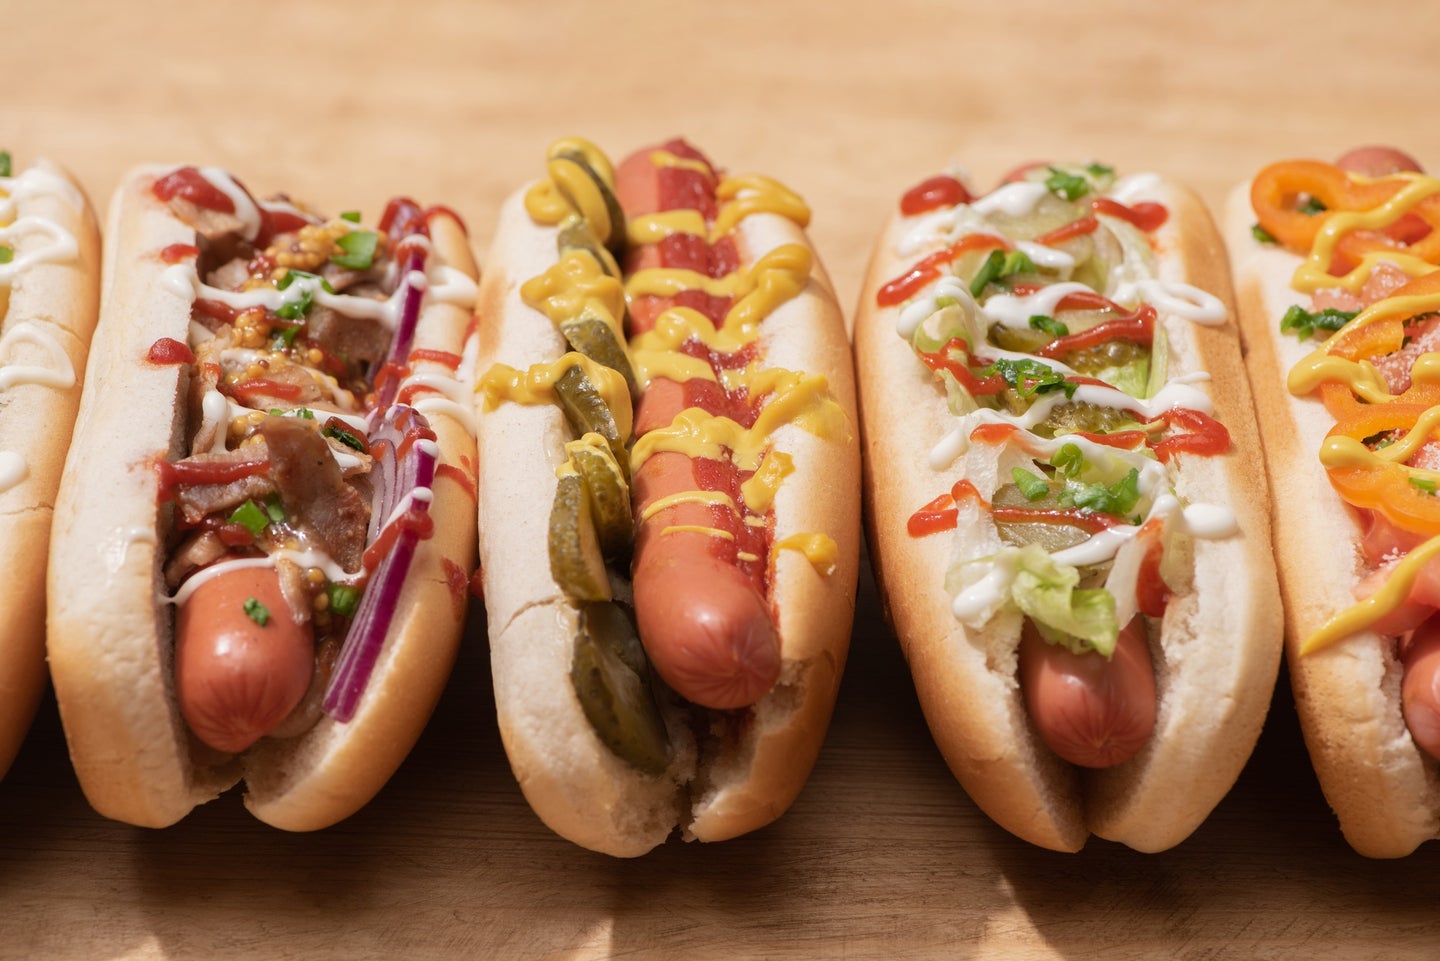 Hot dogs in buns with ketchup, mustard, and other toppings